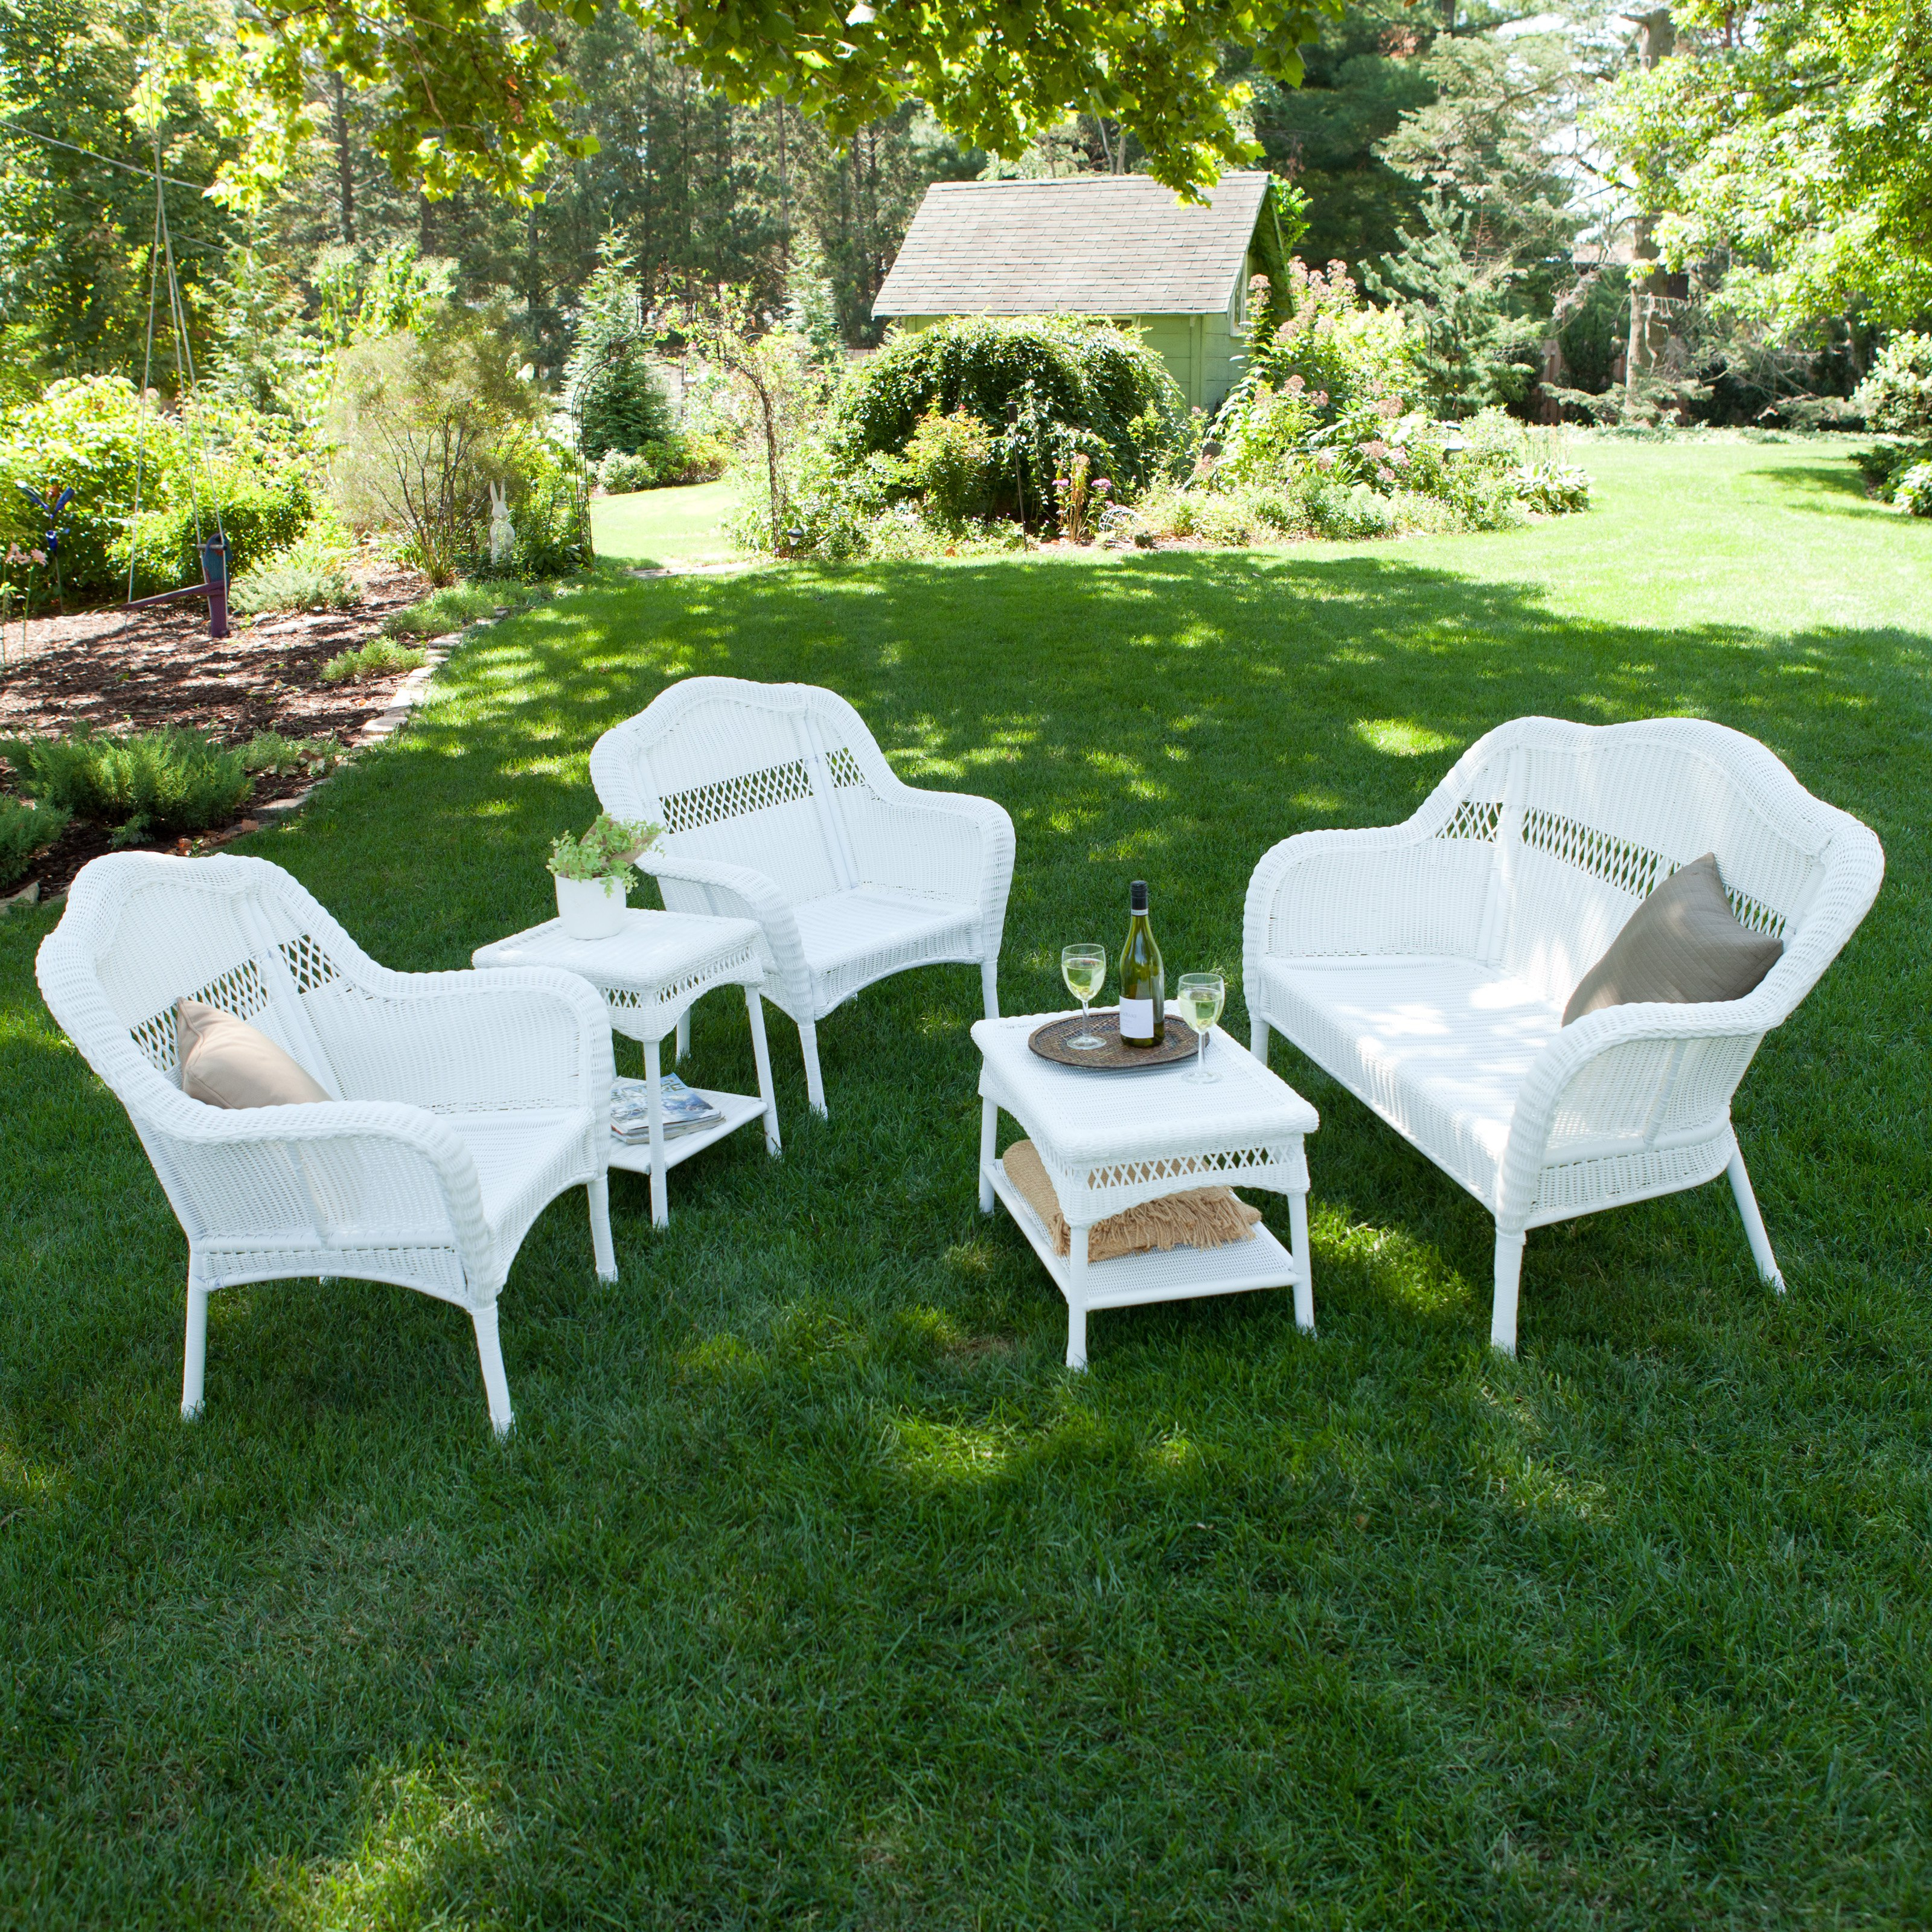 White Resin Wicker Patio Furniture Ideas Outdoor intended for measurements 3200 X 3200